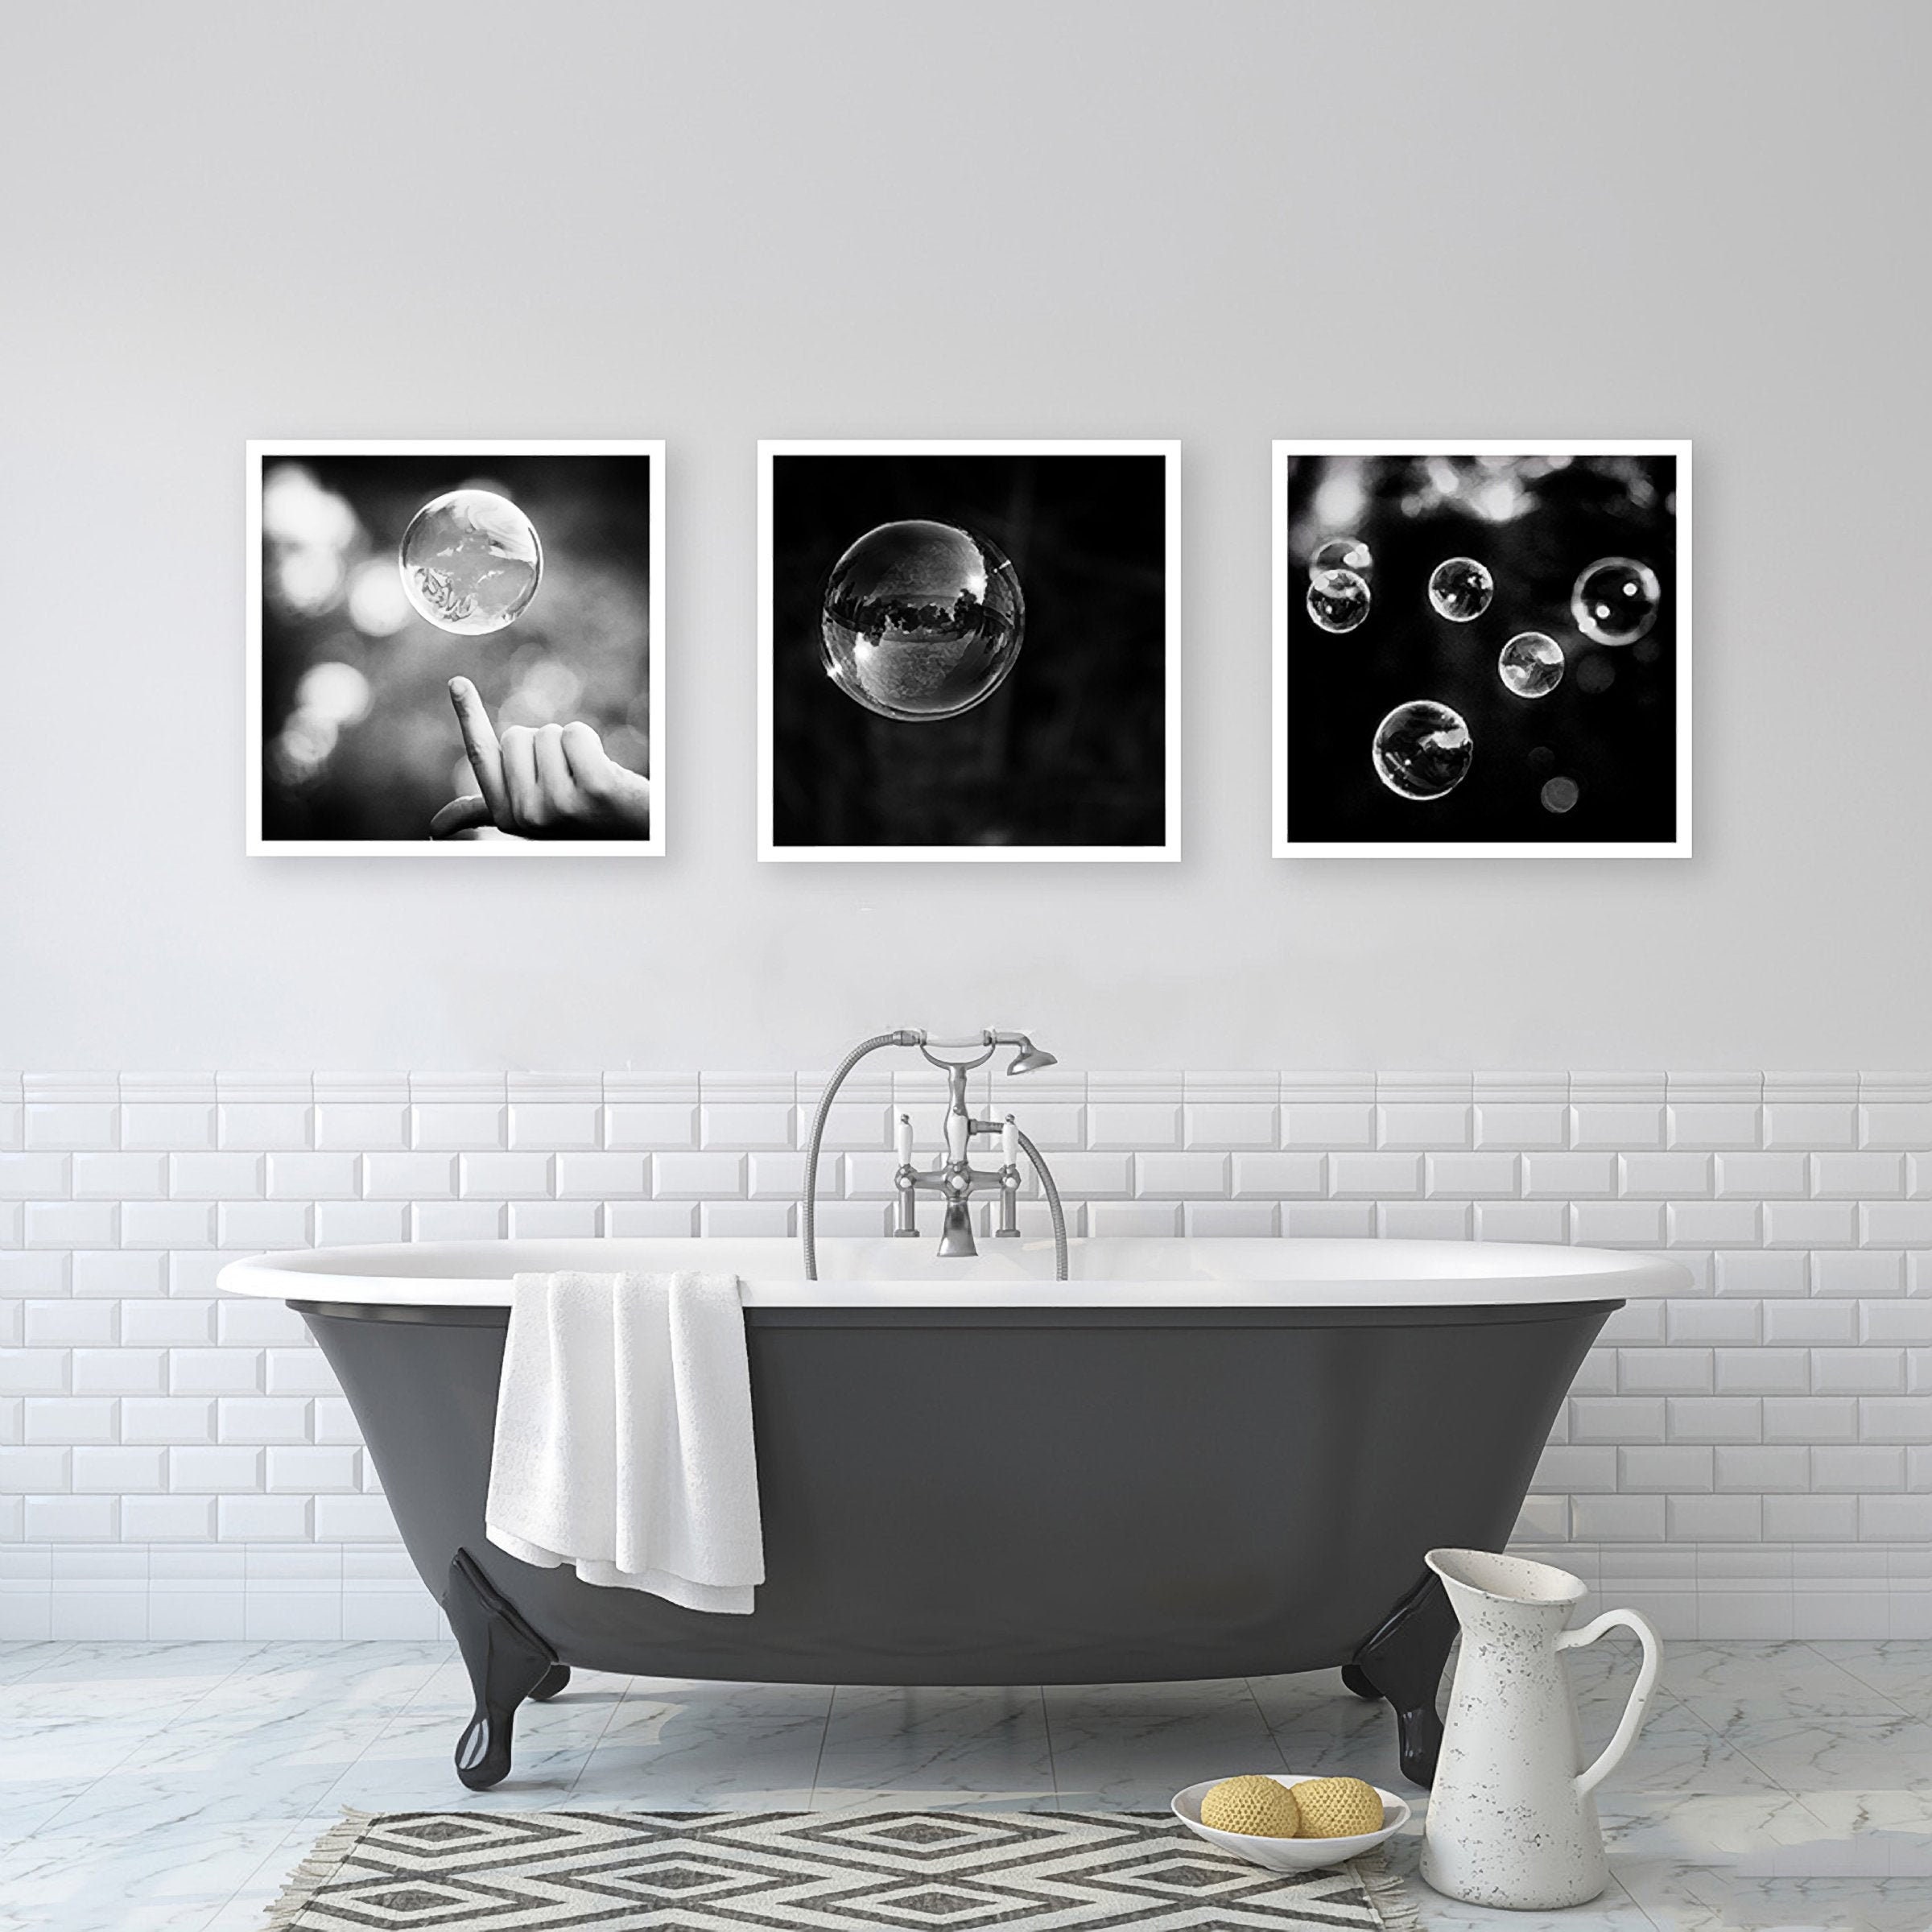 black-and-white-bathroom-set-abstract-bubble-photos-3-prints-etsy